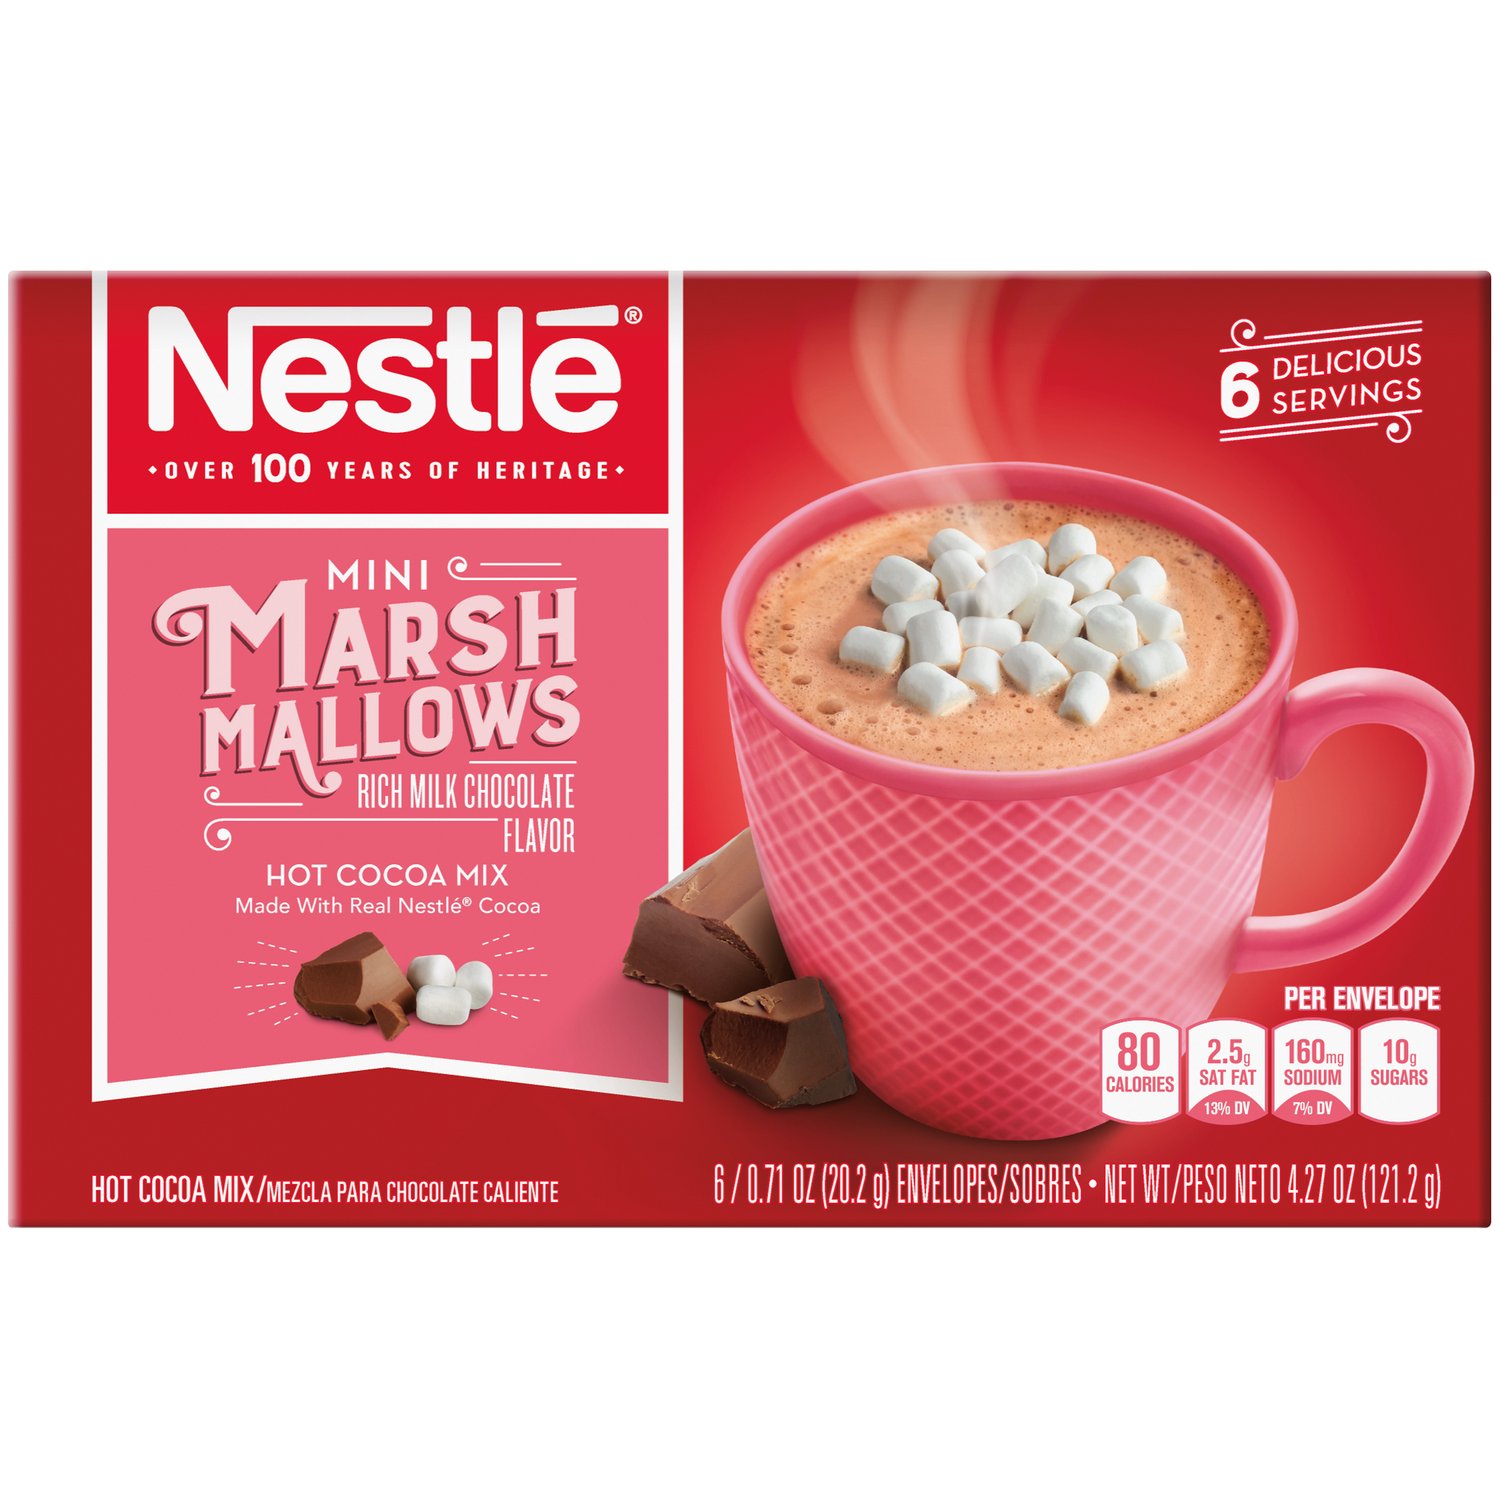 Melville Candy Chocolate Dipped Mini Marshmallow Hot Cocoa